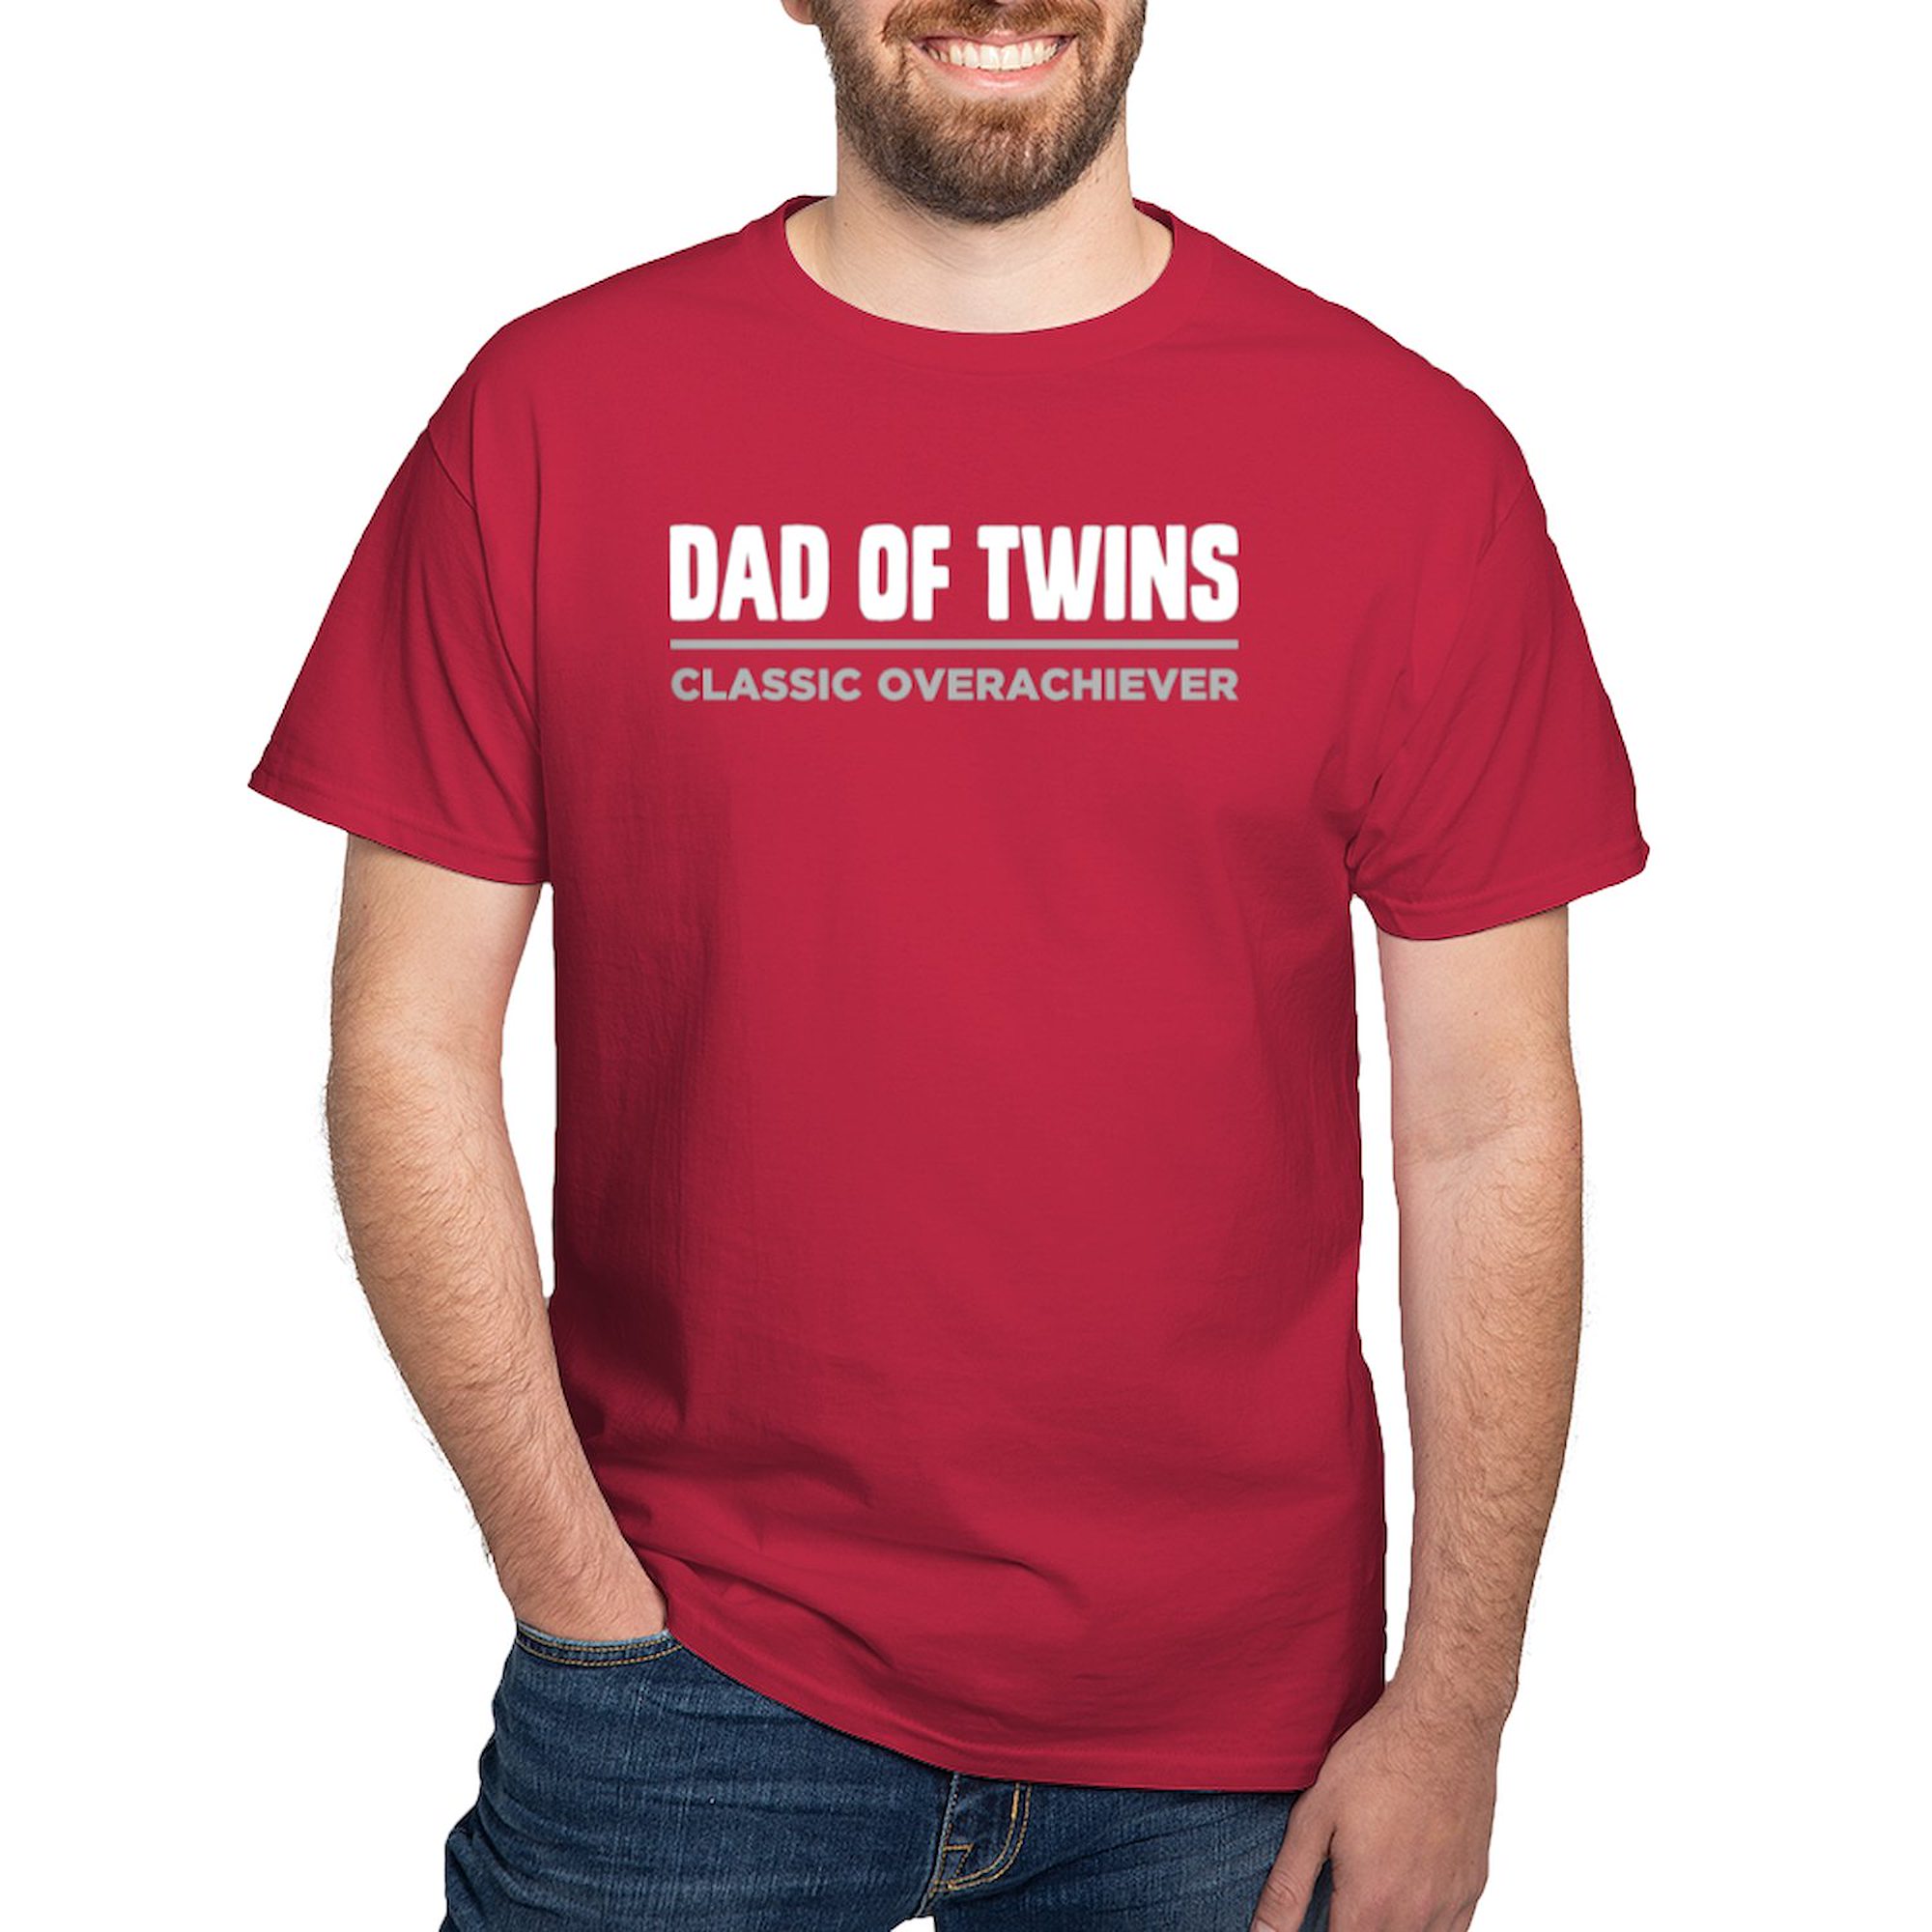 CafePress - DAD OF TWINS Classic Overachiever T Shirt - 100% Cotton T-Shirt - image 1 of 4